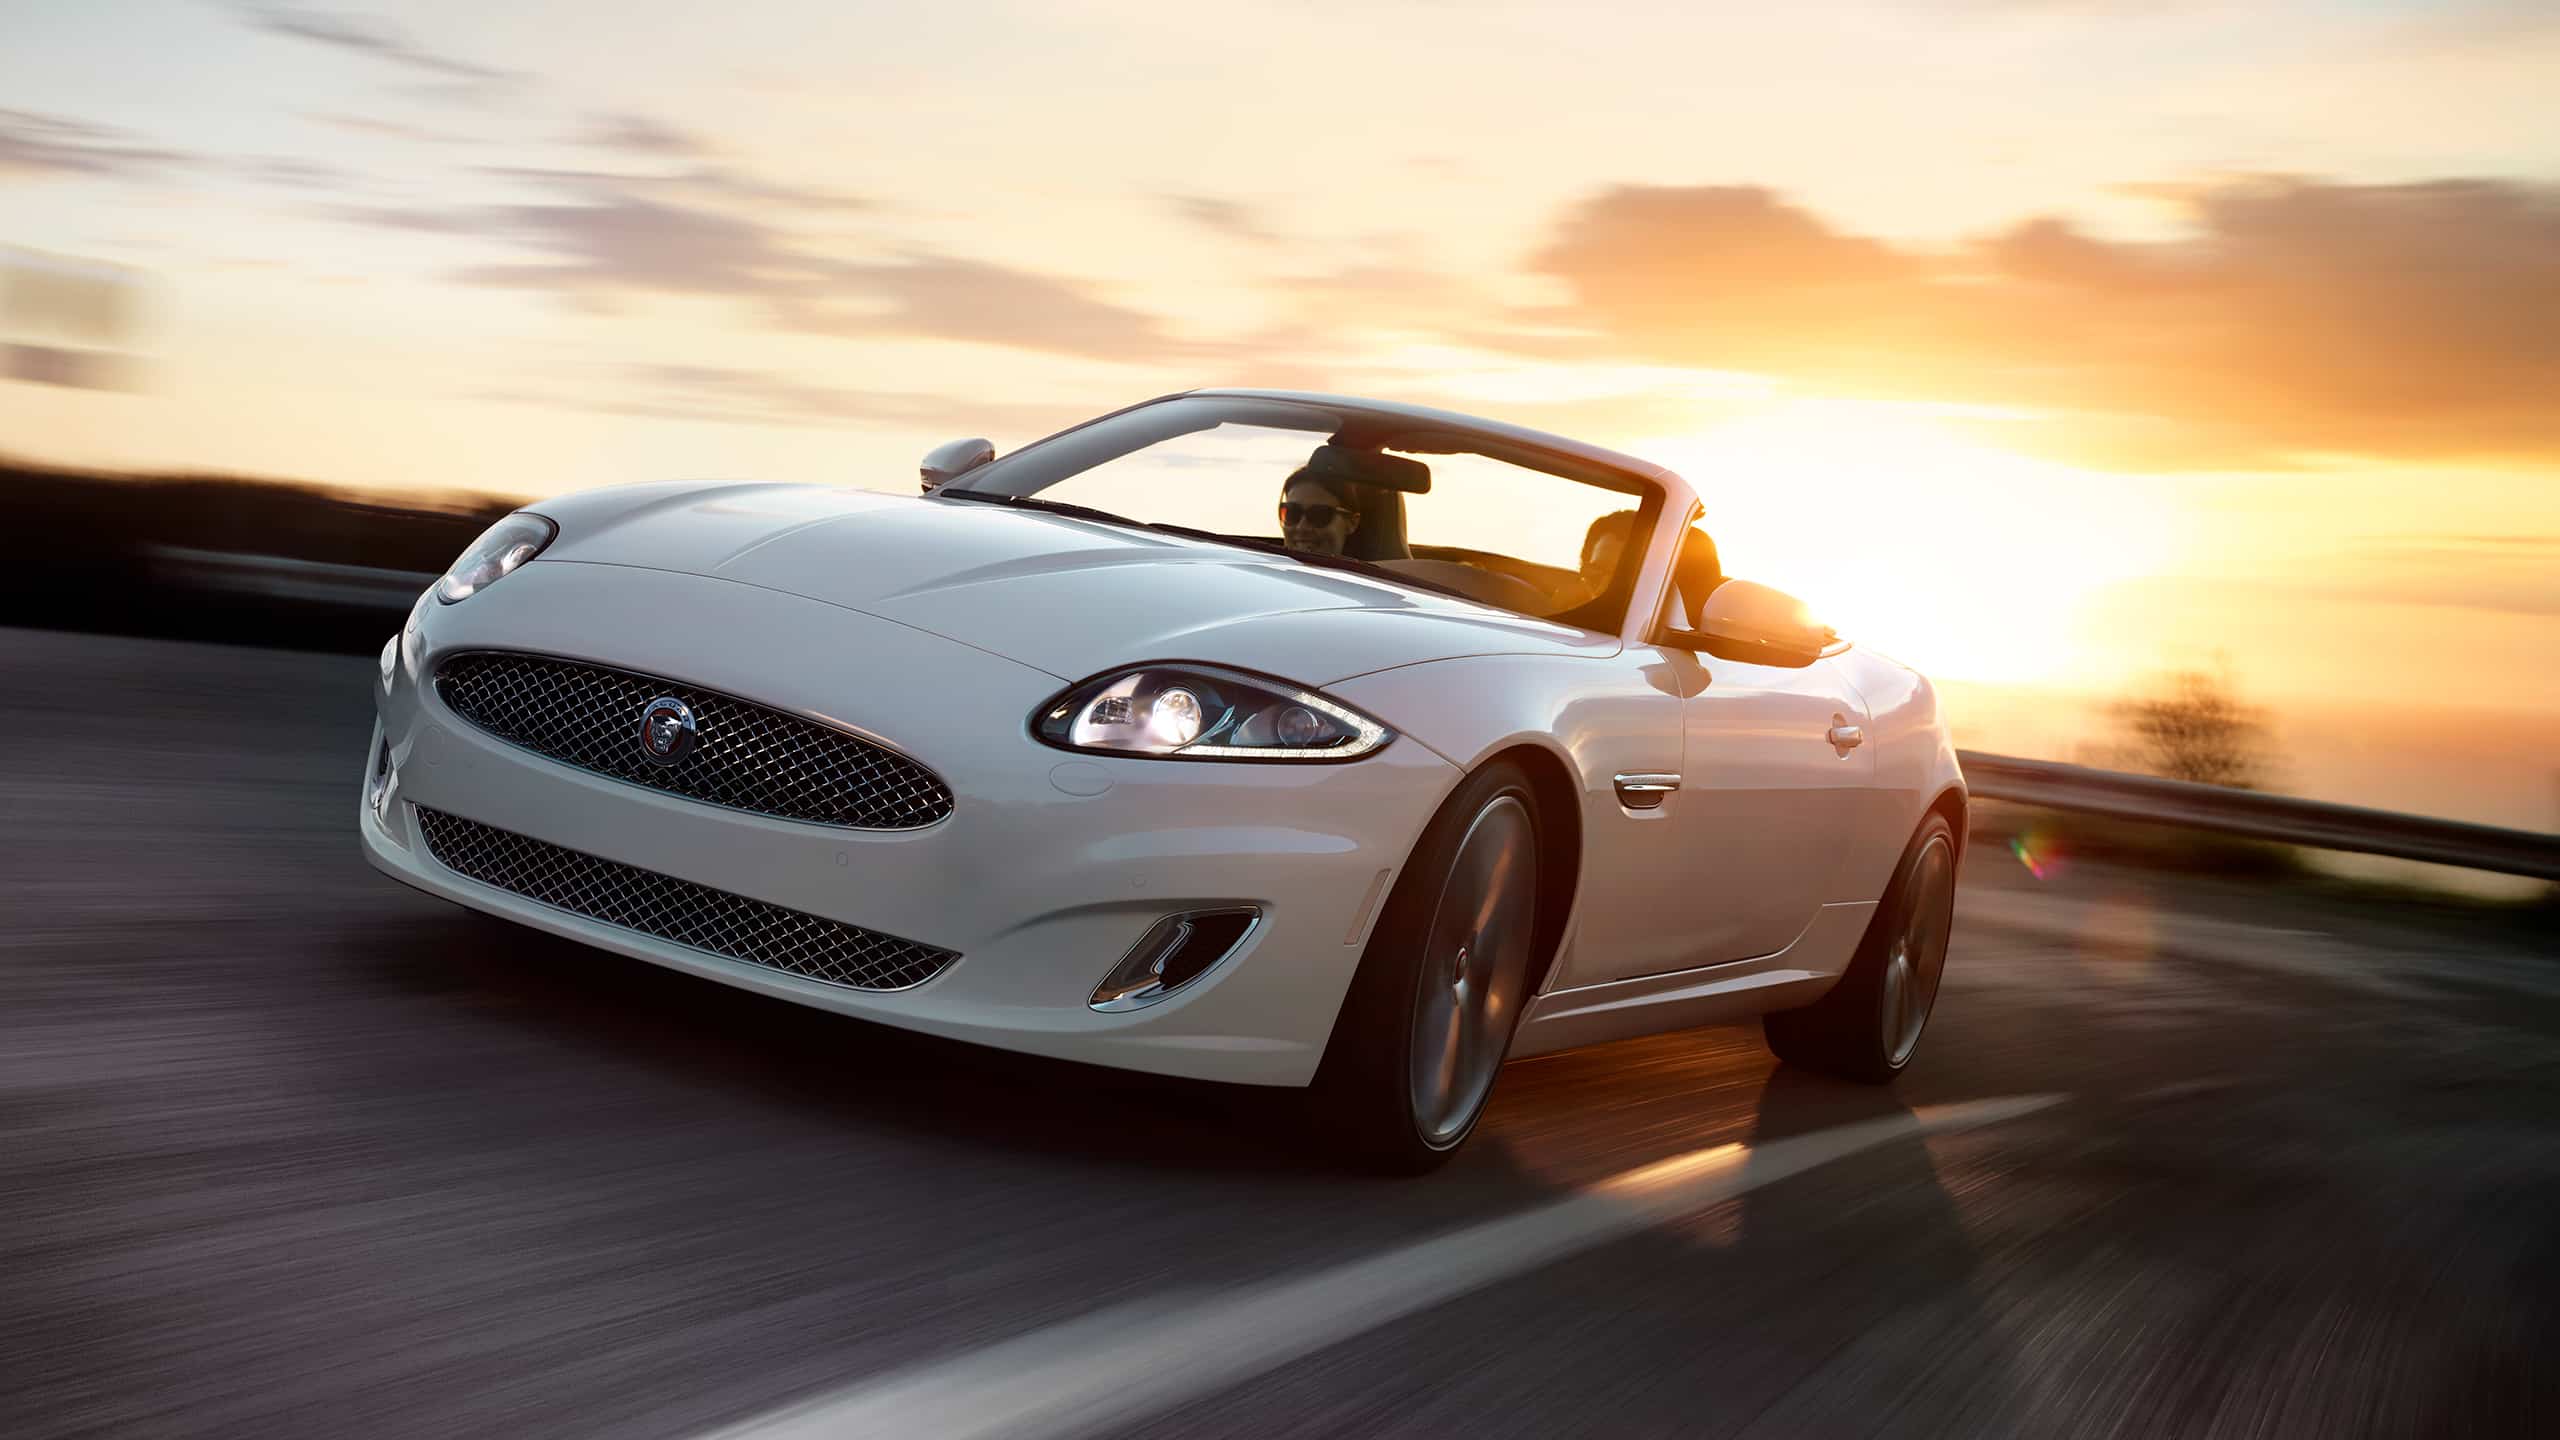 Jaguar XK running on the road and with sunset background 